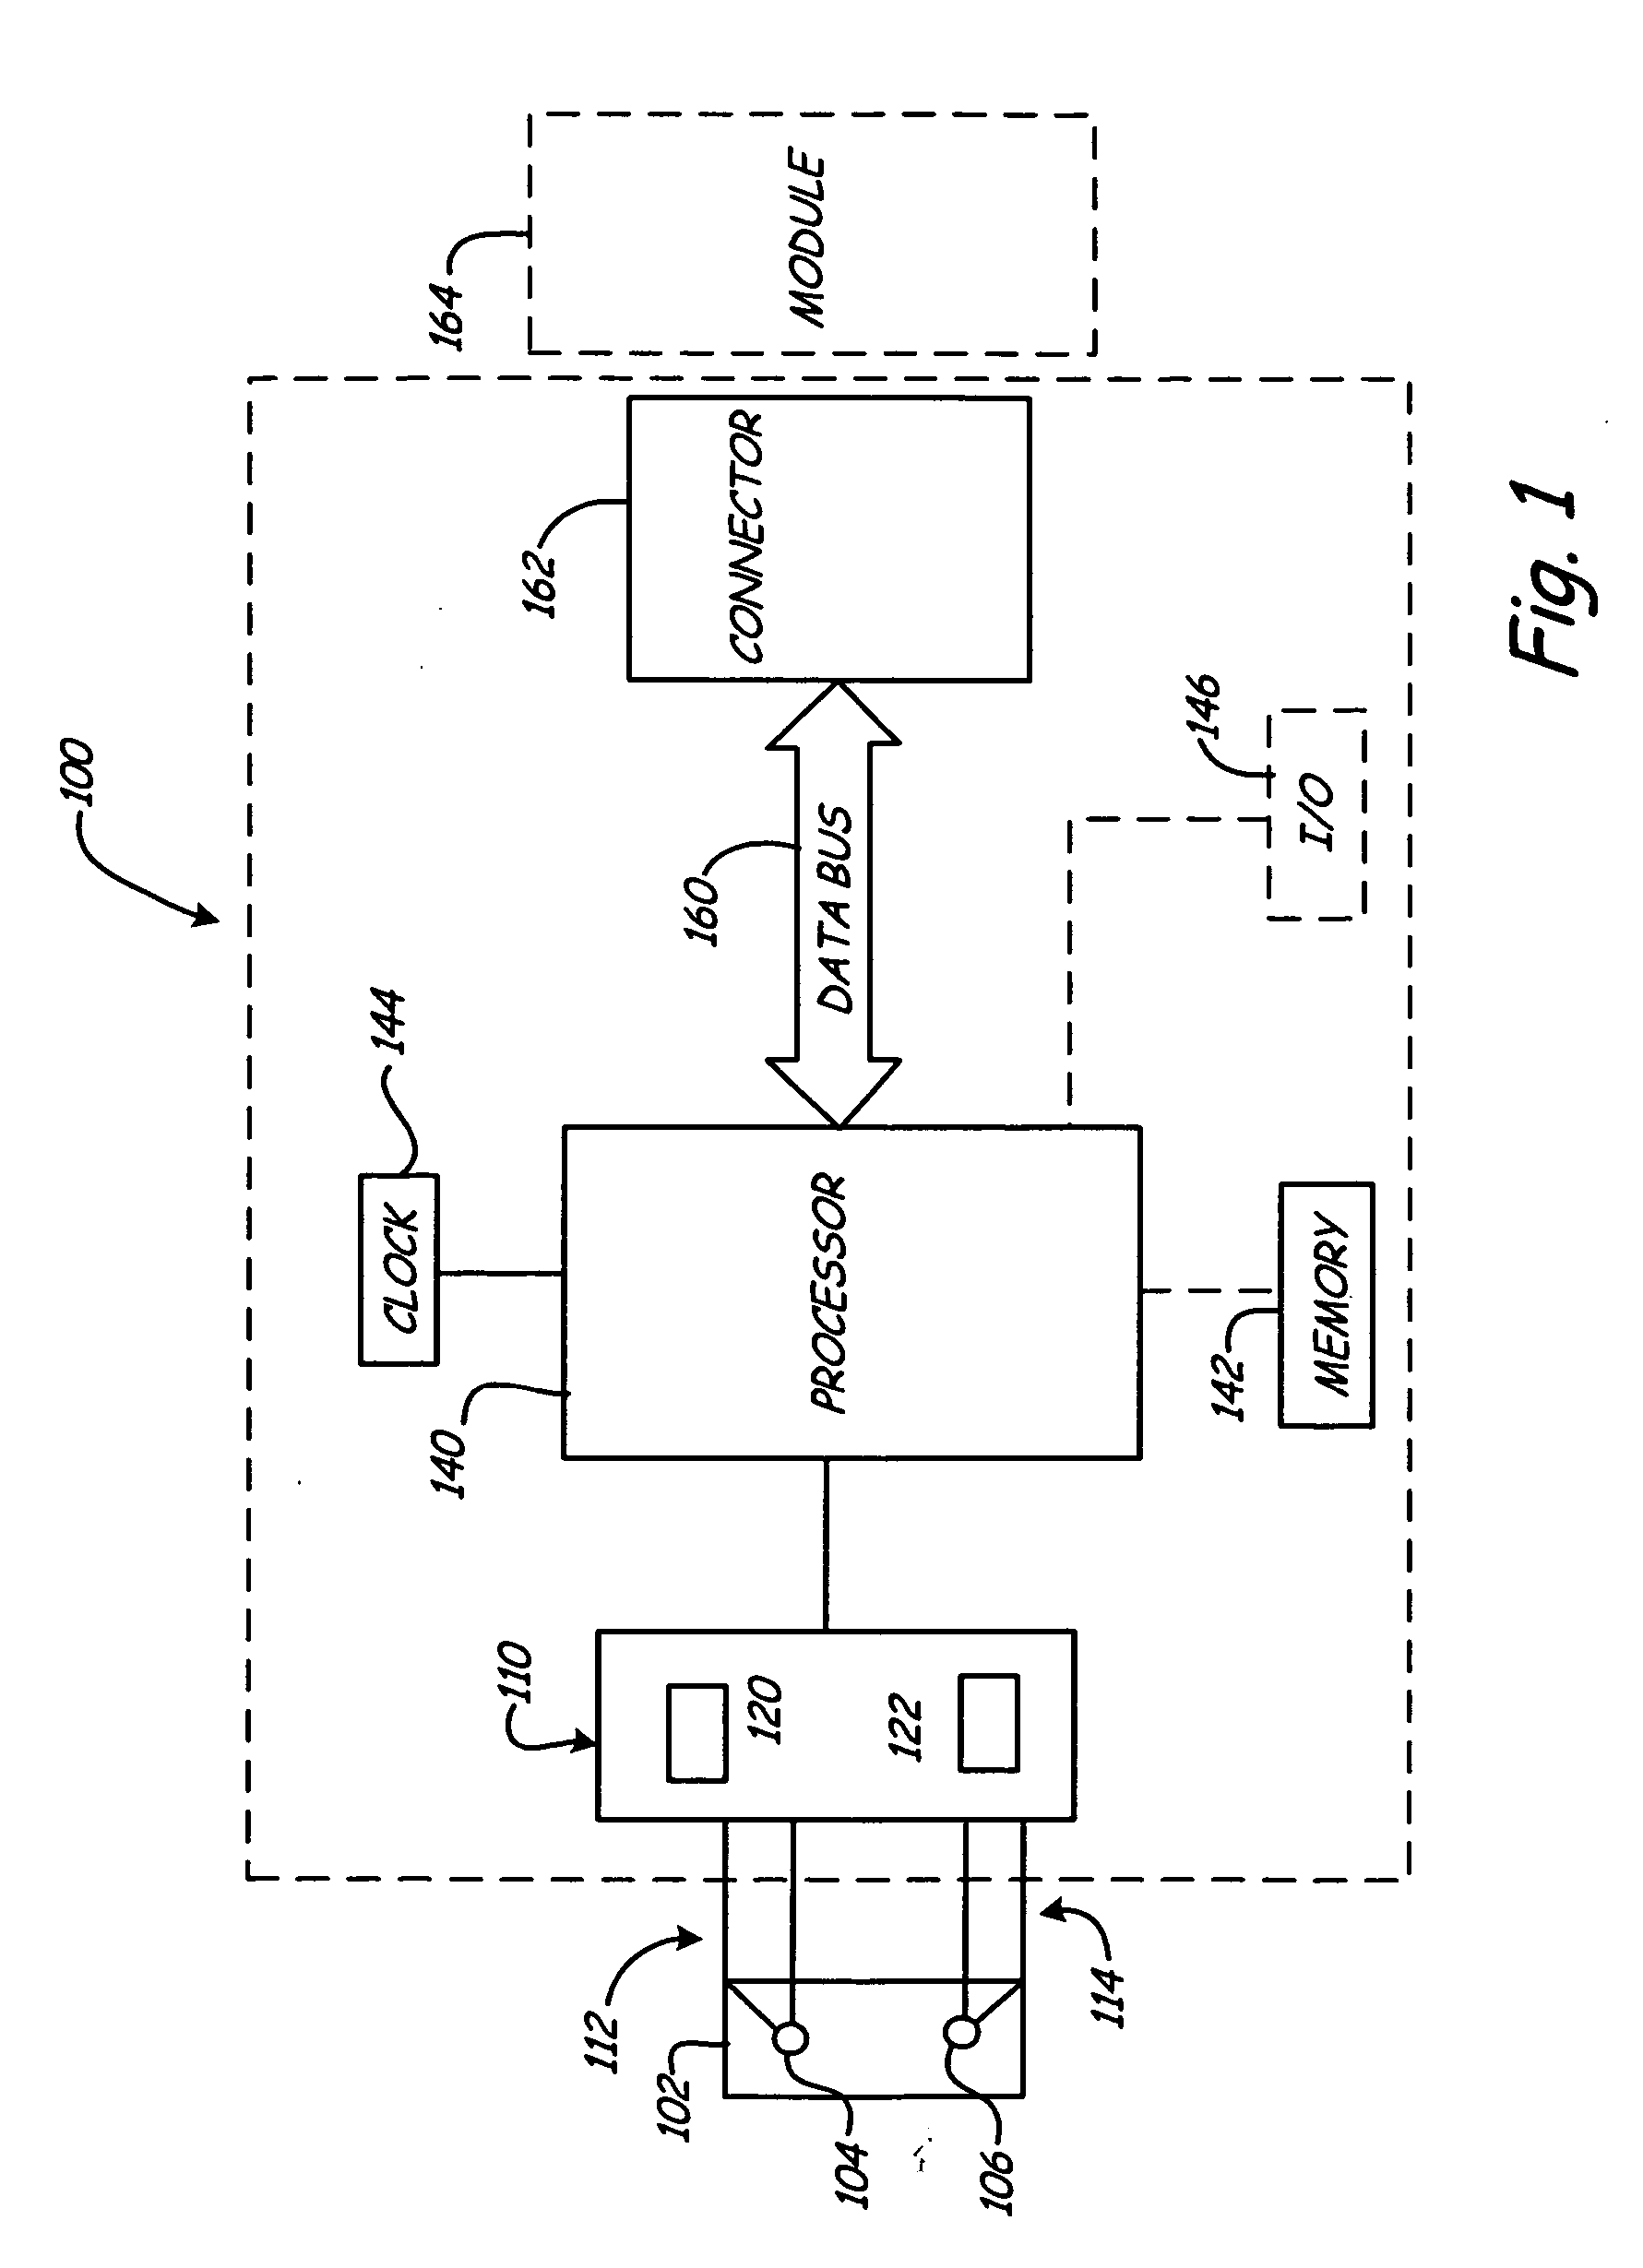 Battery testers with secondary functionality